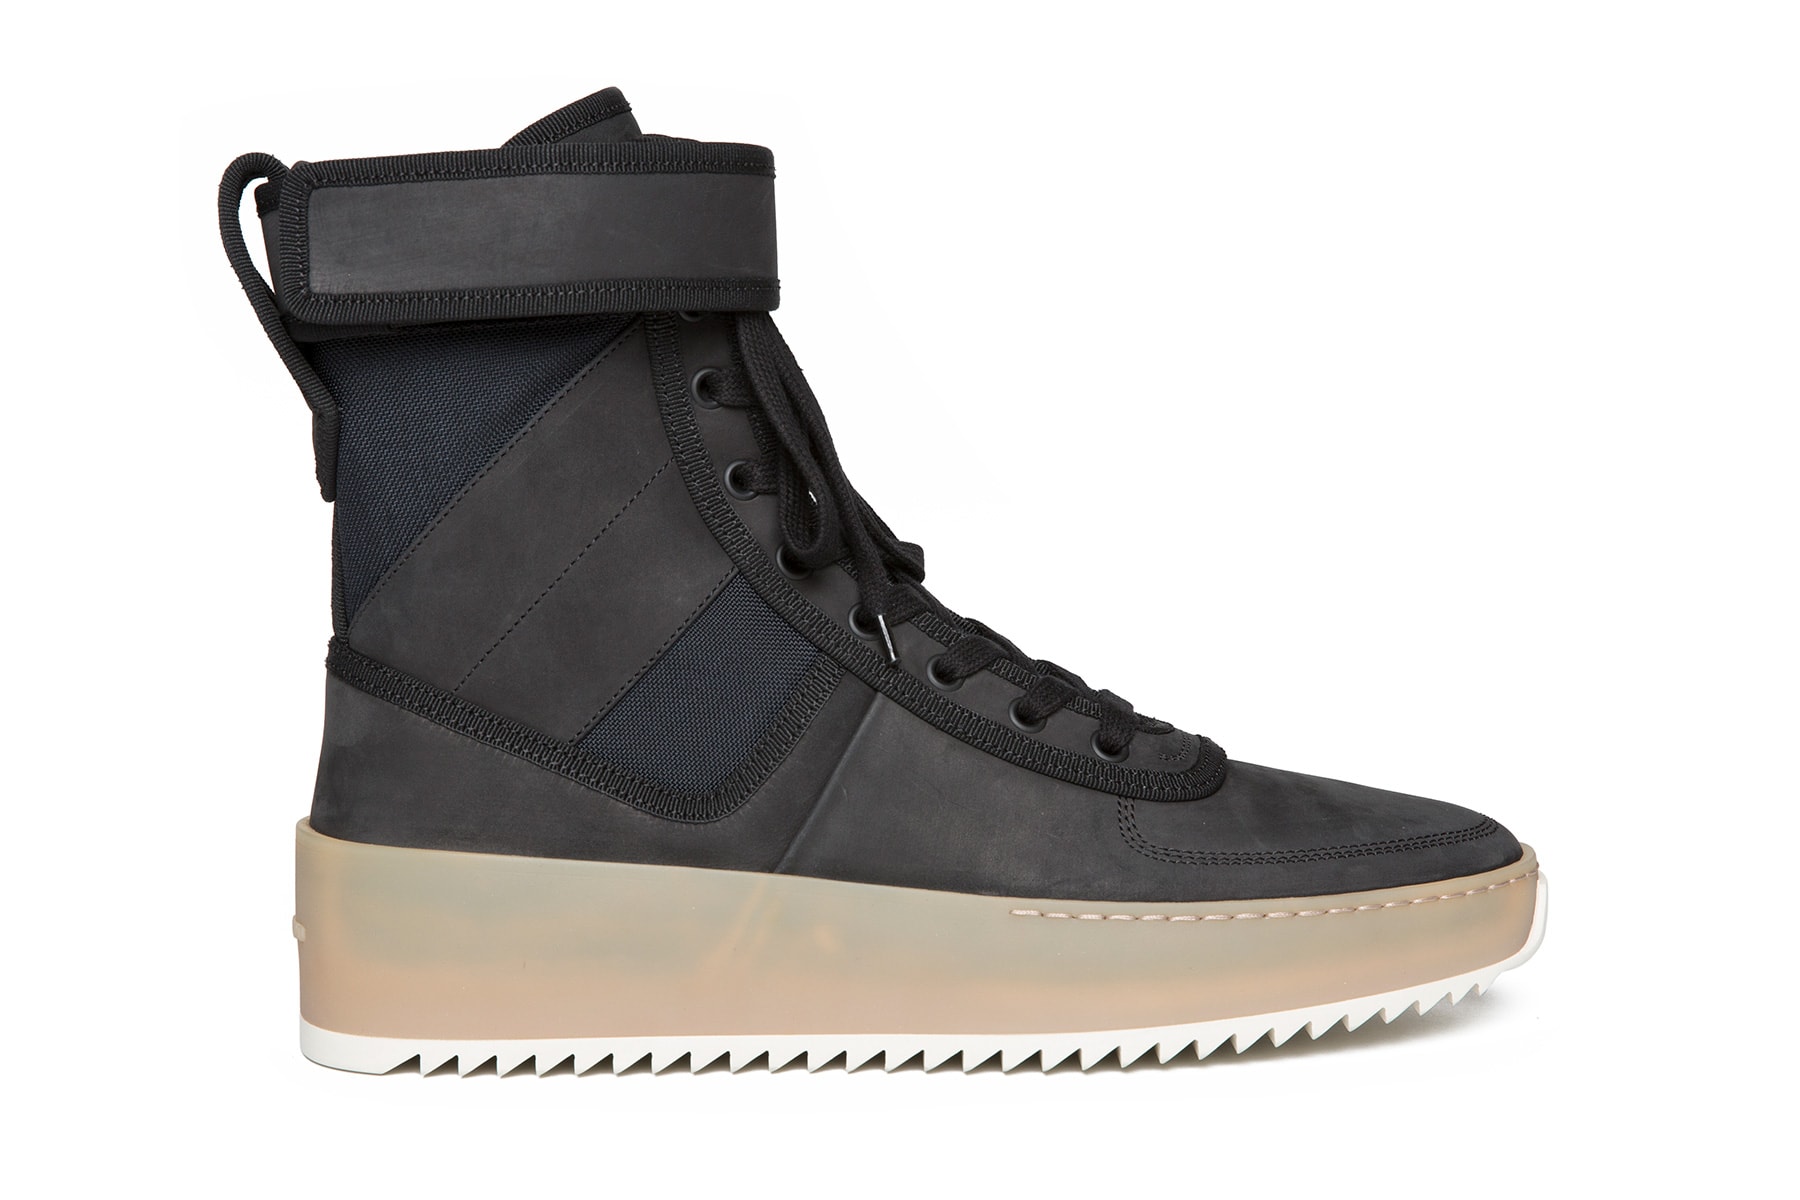 Fear of God Archive Military Sneaker Cyber Monday Deal 2017